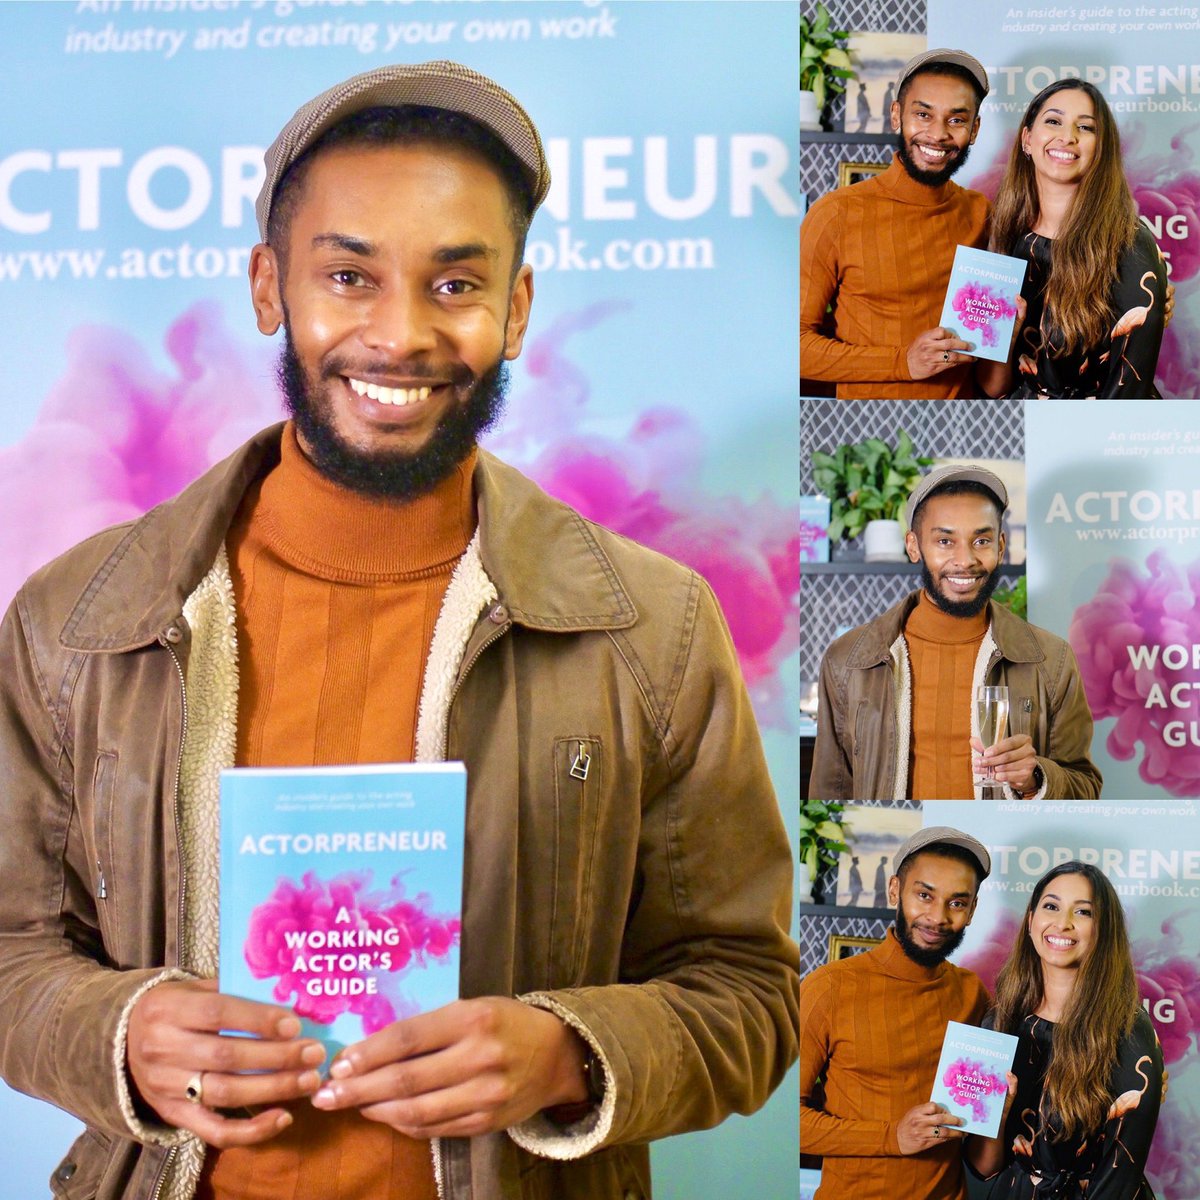 Last week at the #launch of my #beautiful #friend @jadeasha #actress now #author of her 1st #book @ActorpreneurB available on @amazon #actorsguide #actorpreneur #actors #style #Celebration #support #BAME #femaleauthor #mauritianactress #blackmaleactor